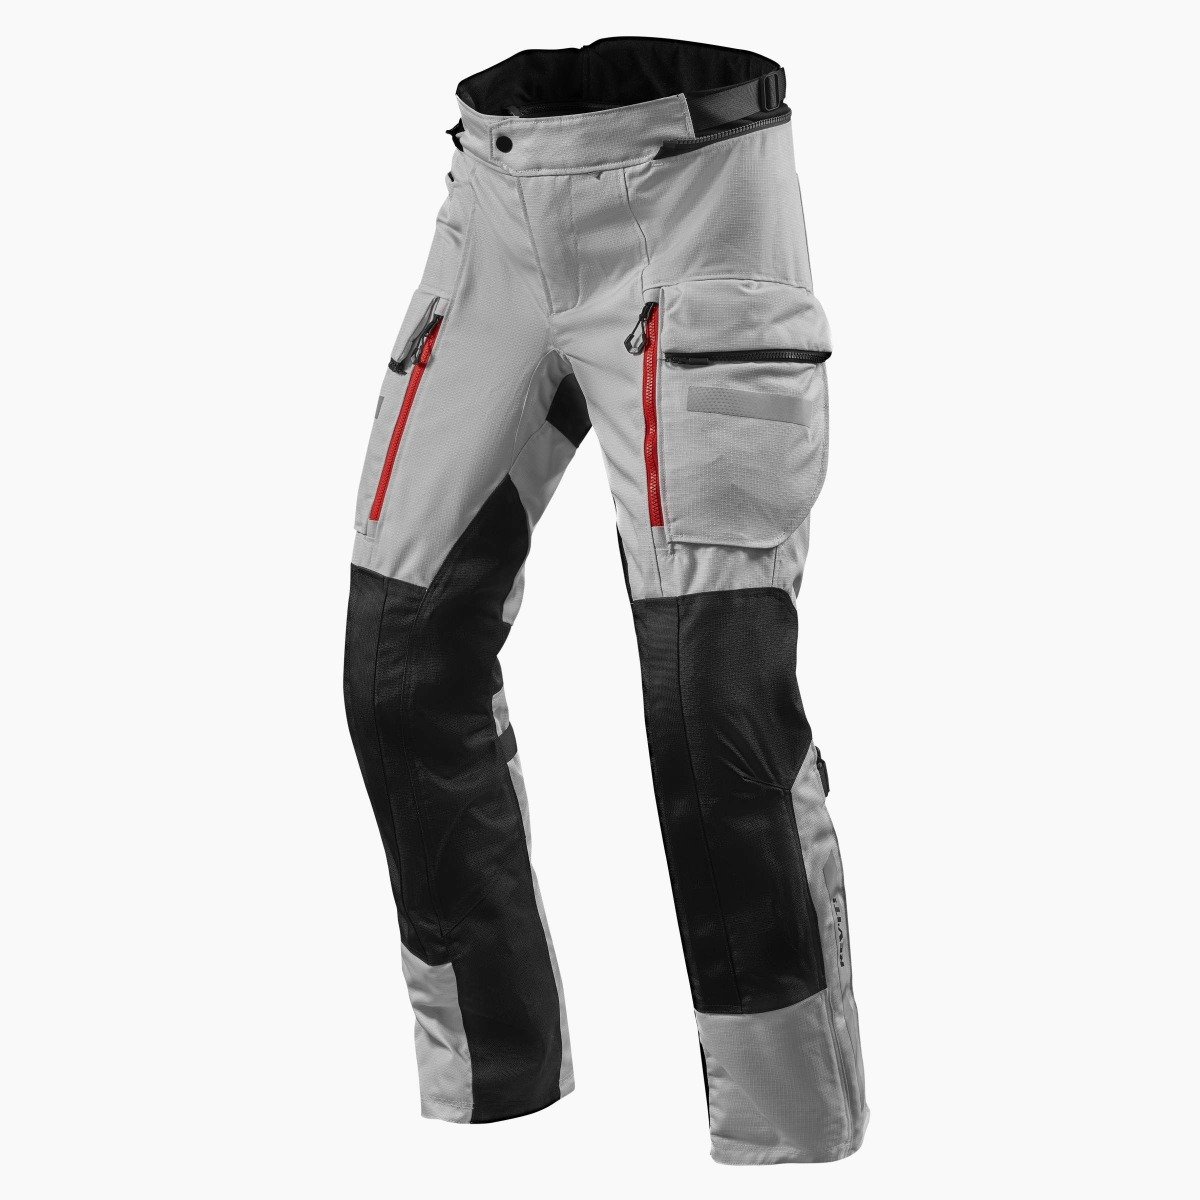 Image of REV'IT! Sand 4 H2O Short Silver Black Motorcycle Pants Size XL ID 8700001316514